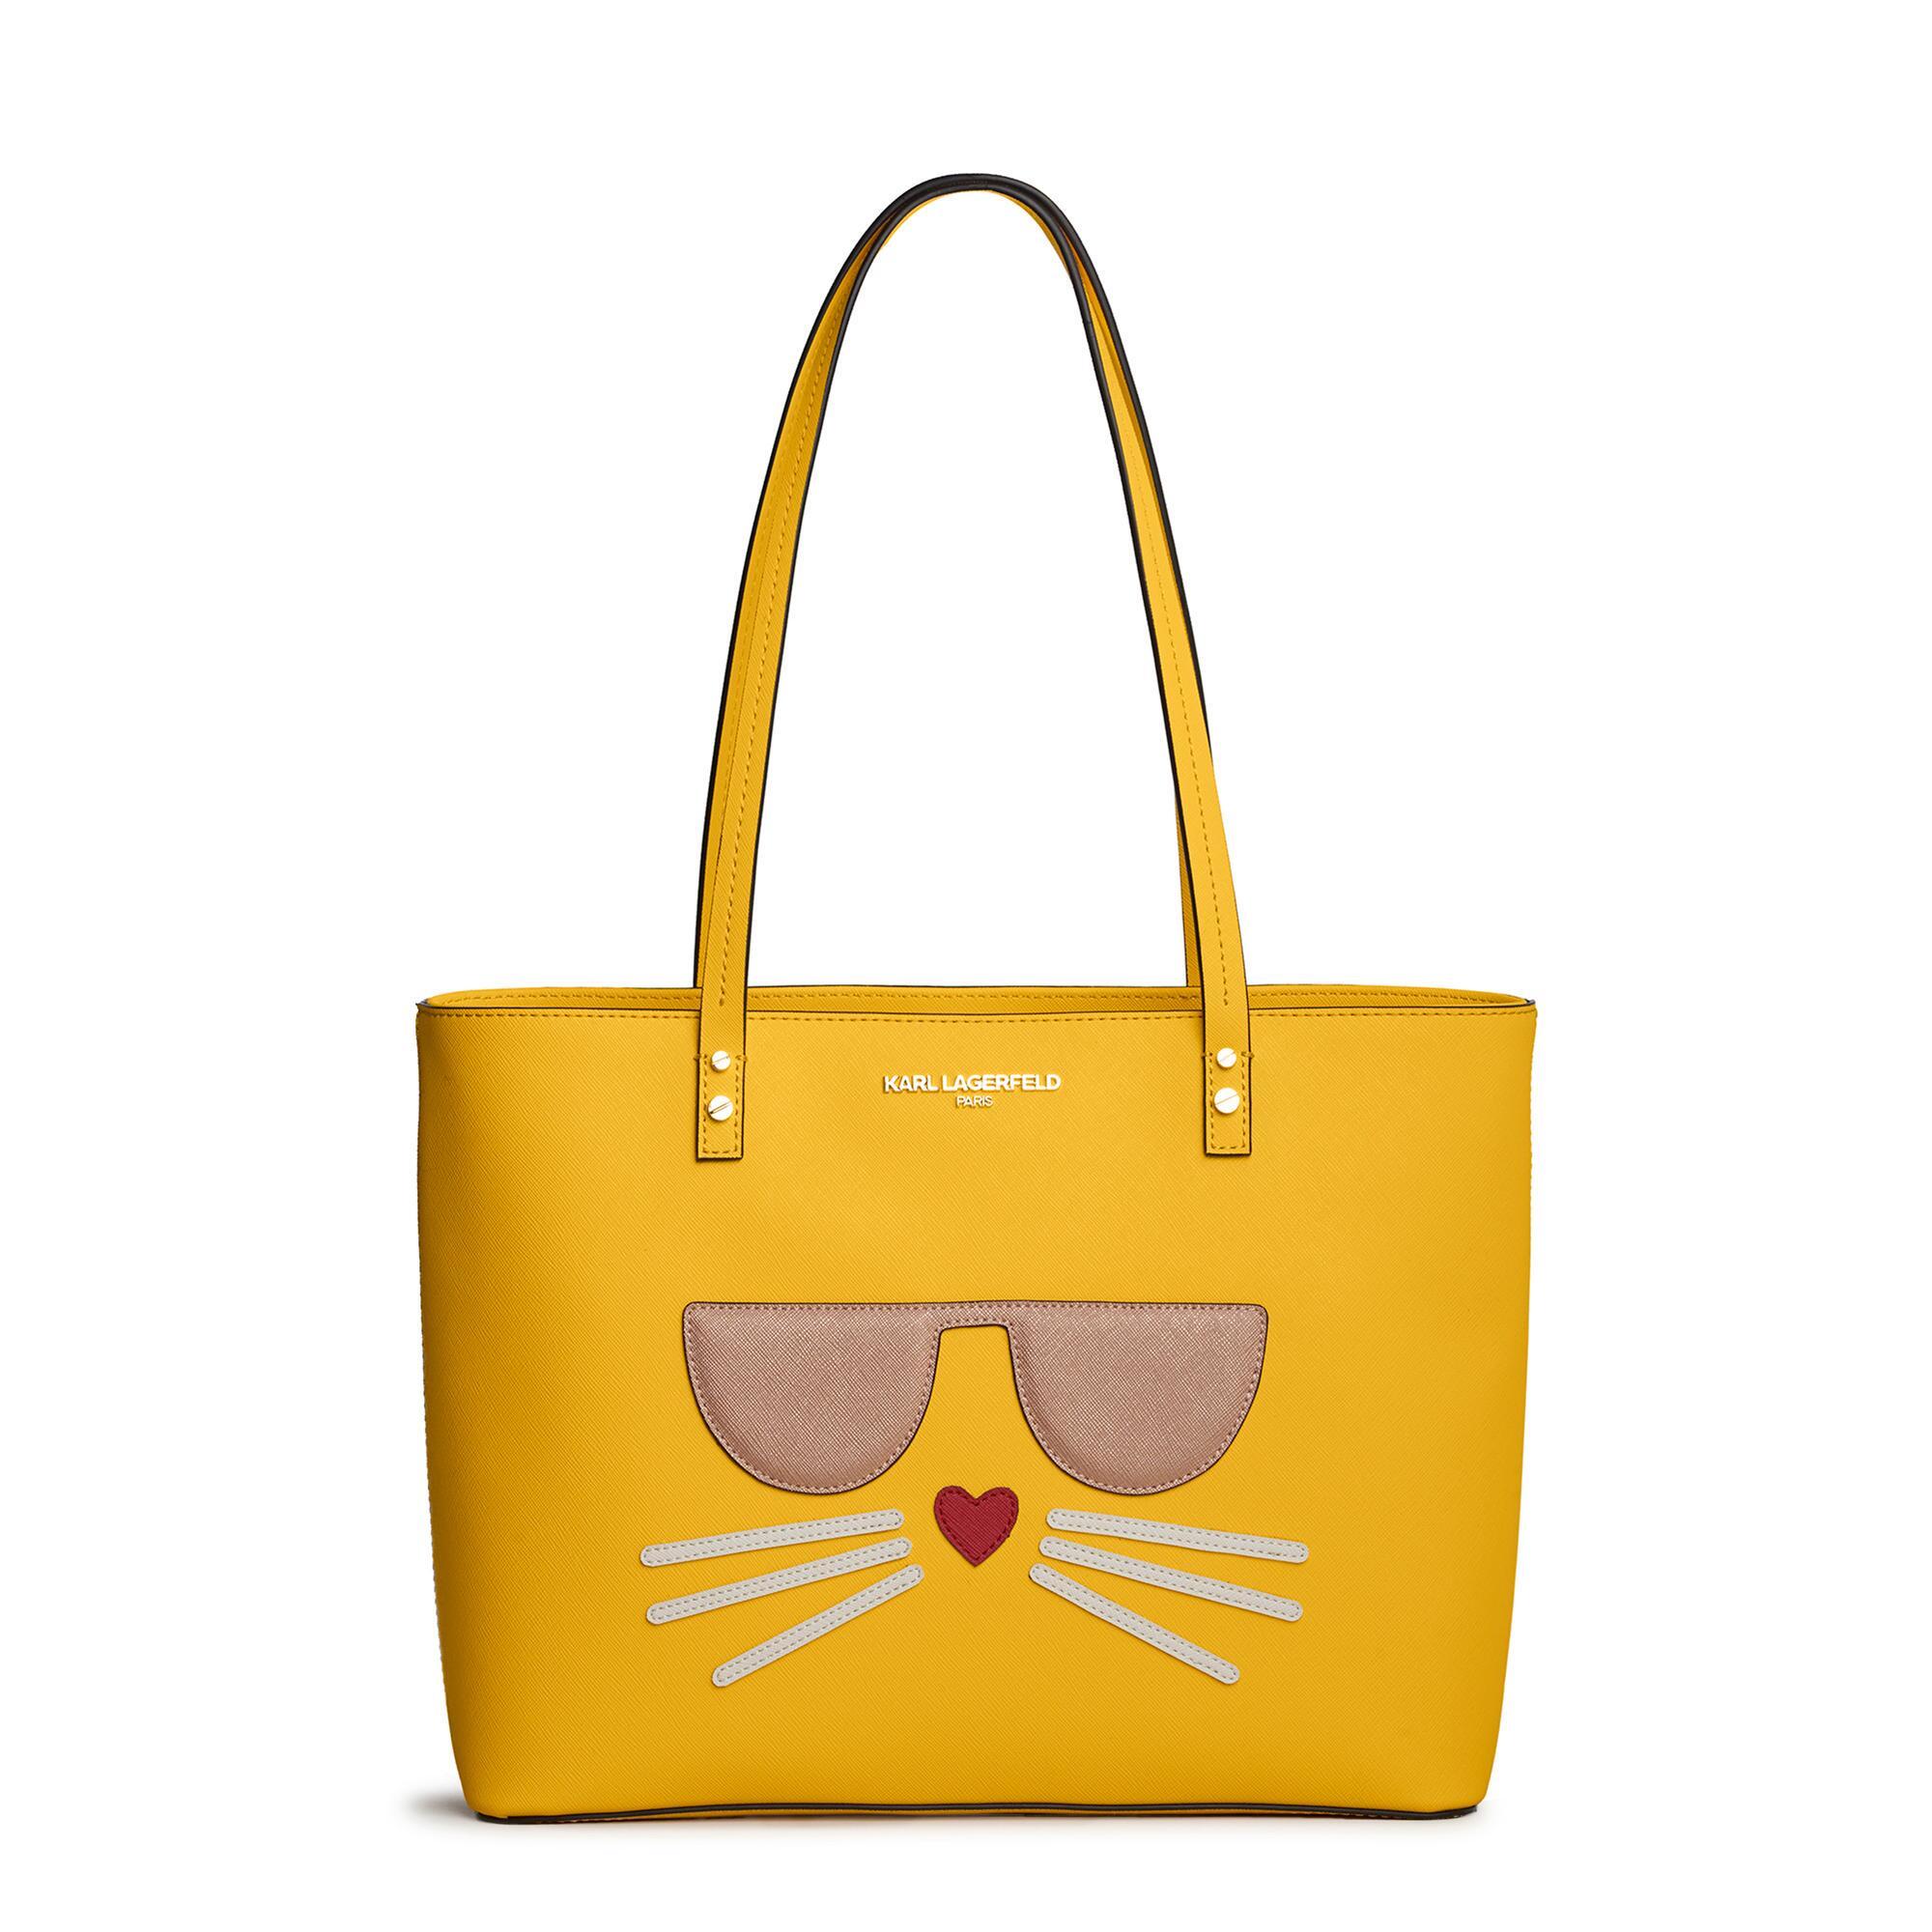 Karl Lagerfeld Maybelle Tote Bag in Yellow - Lyst